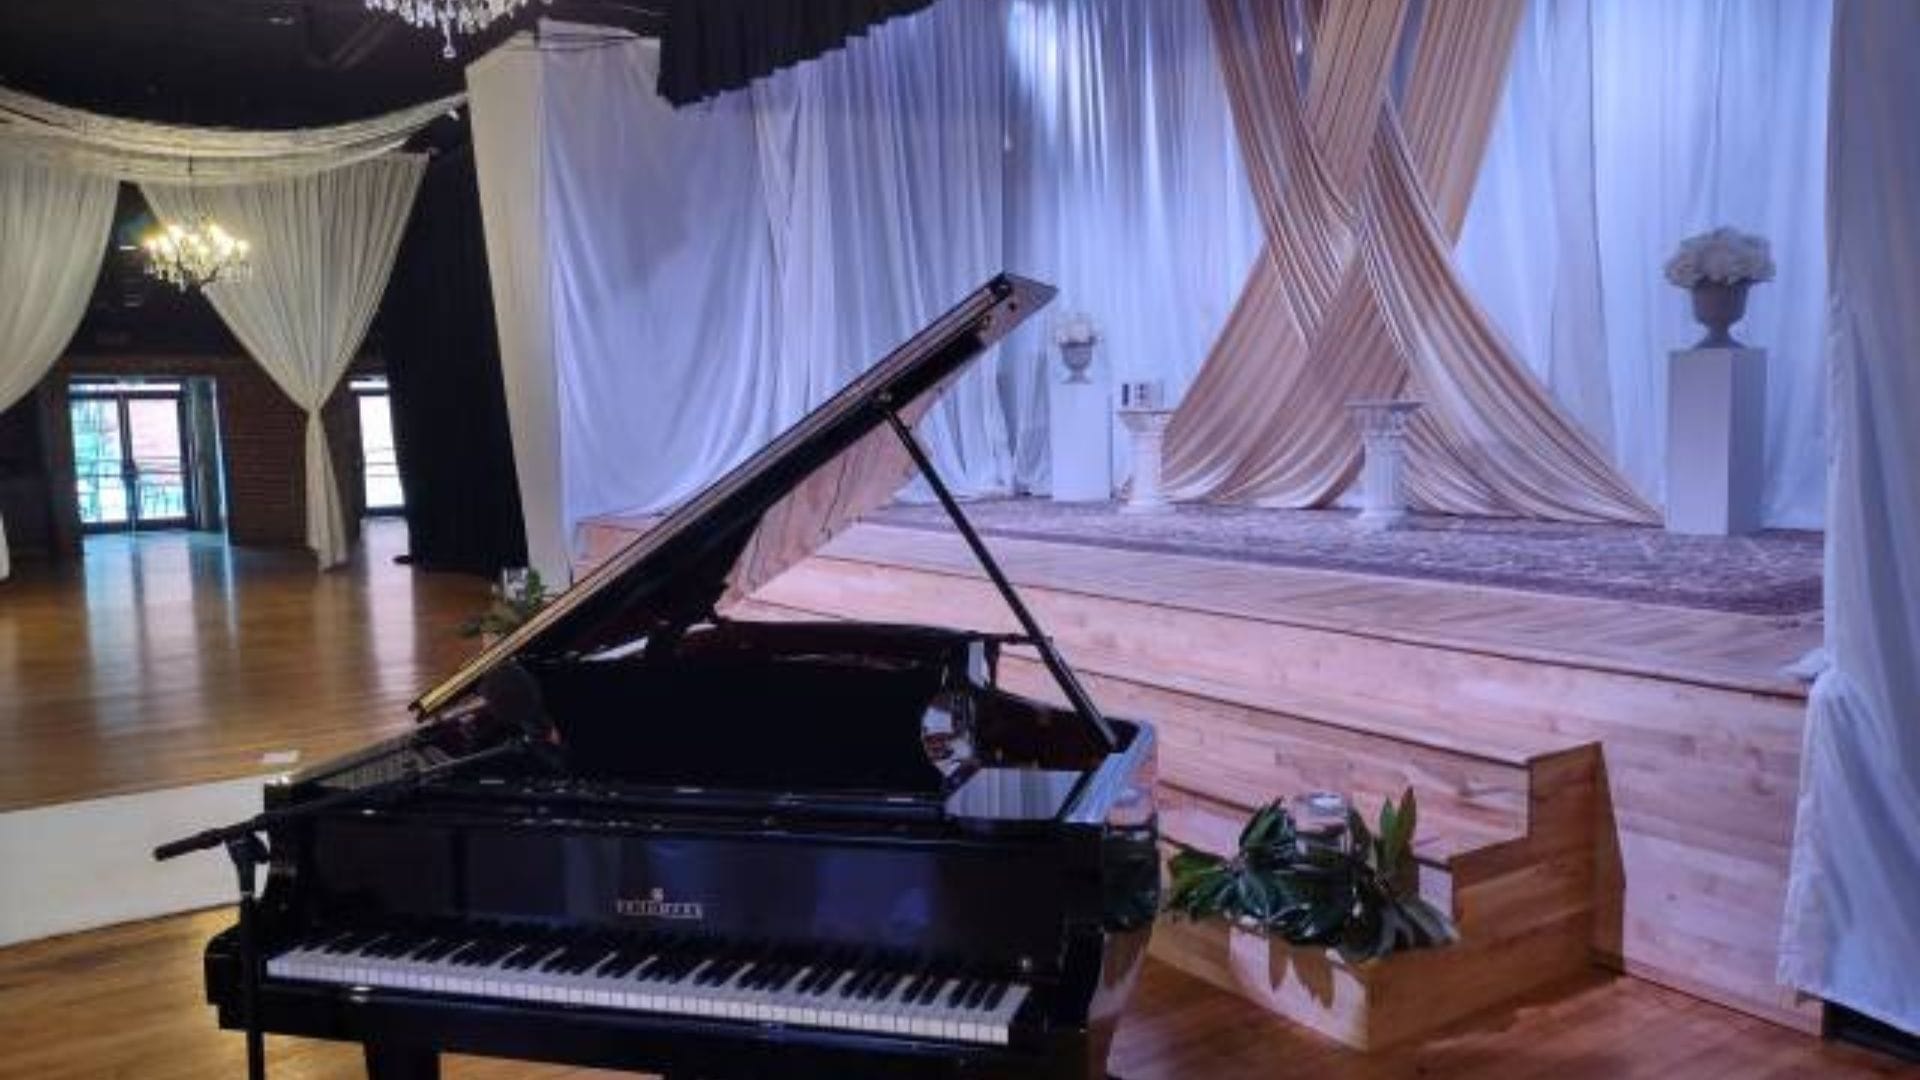 A grand piano is placed near a stage adorned with white and gold drapes and floral arrangements in an elegantly decorated event hall, offering exactly what guests want from a wedding reception.